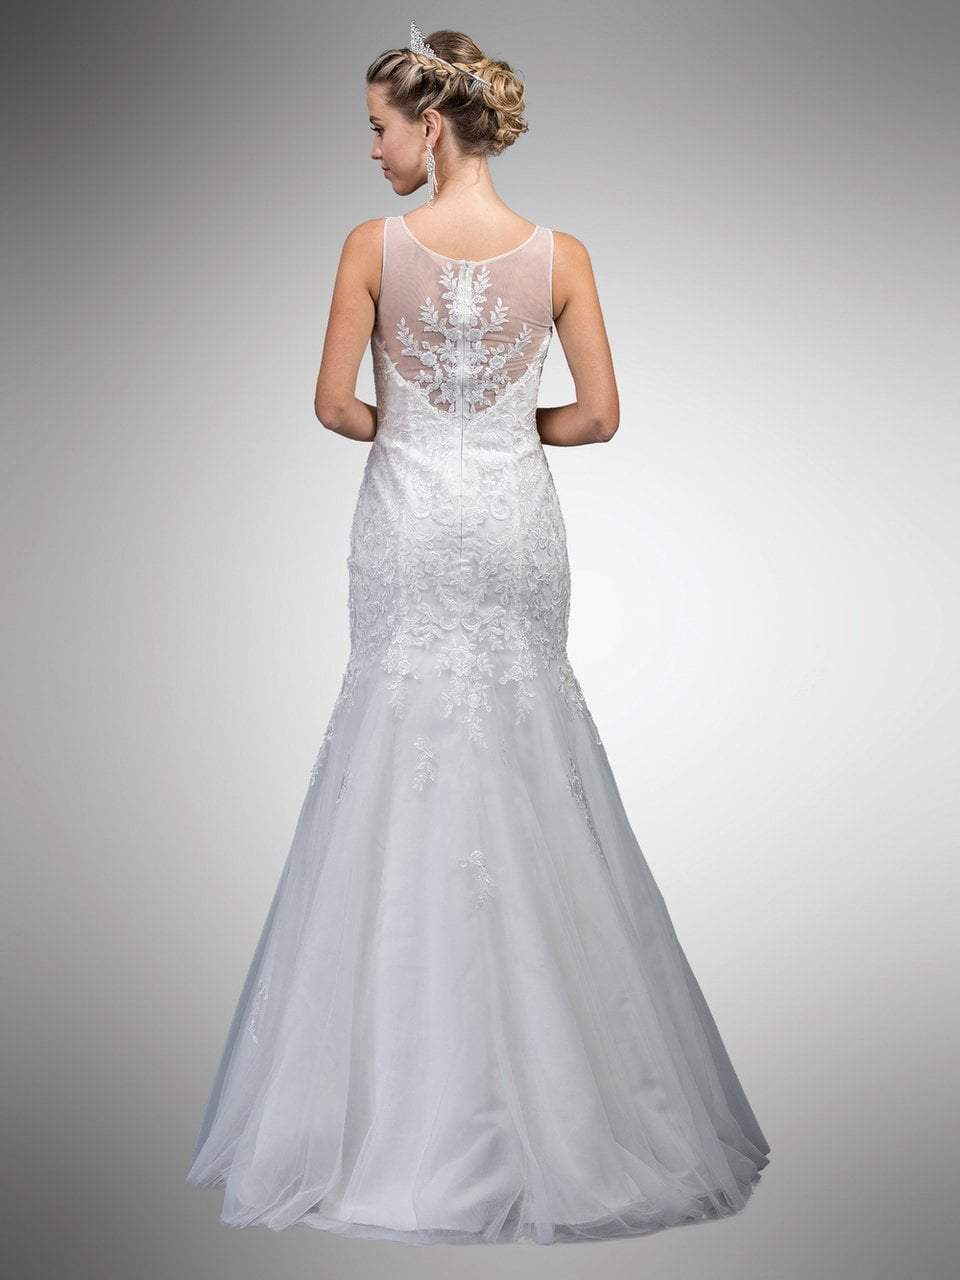 Dancing Queen Bridal - A7001 Sleeveless Beaded Lace Trumpet Gown ...